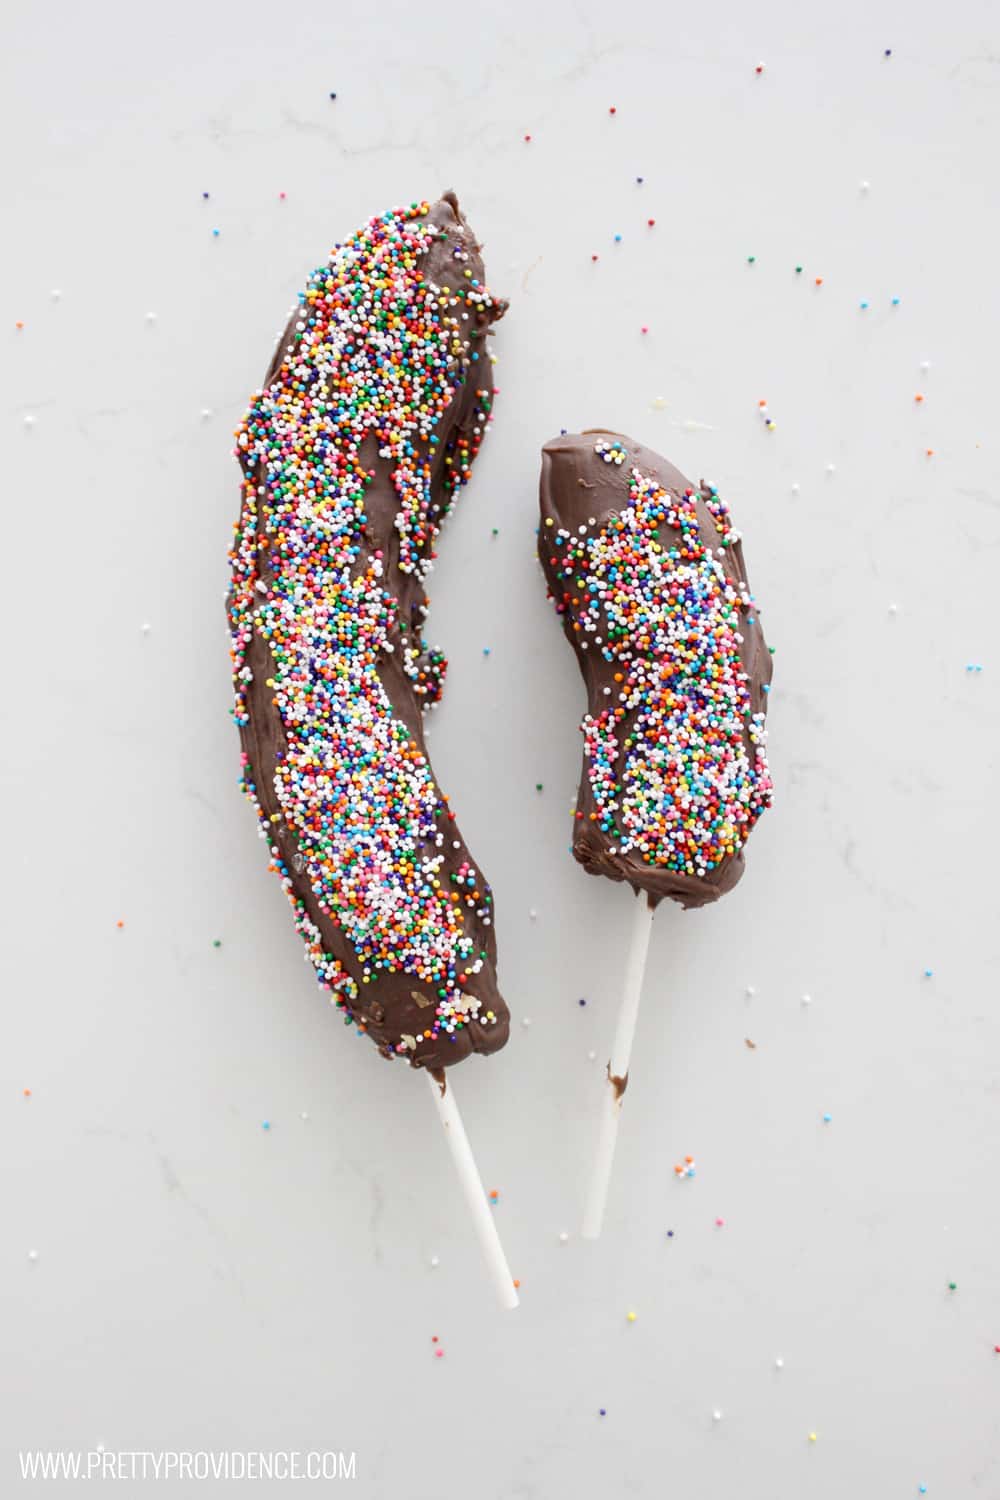 Not only are these frozen chocolate covered bananas easy to make, they are freaking delicious! Such a fun summer treat, and lots better for you than a regular ice cream bar! 